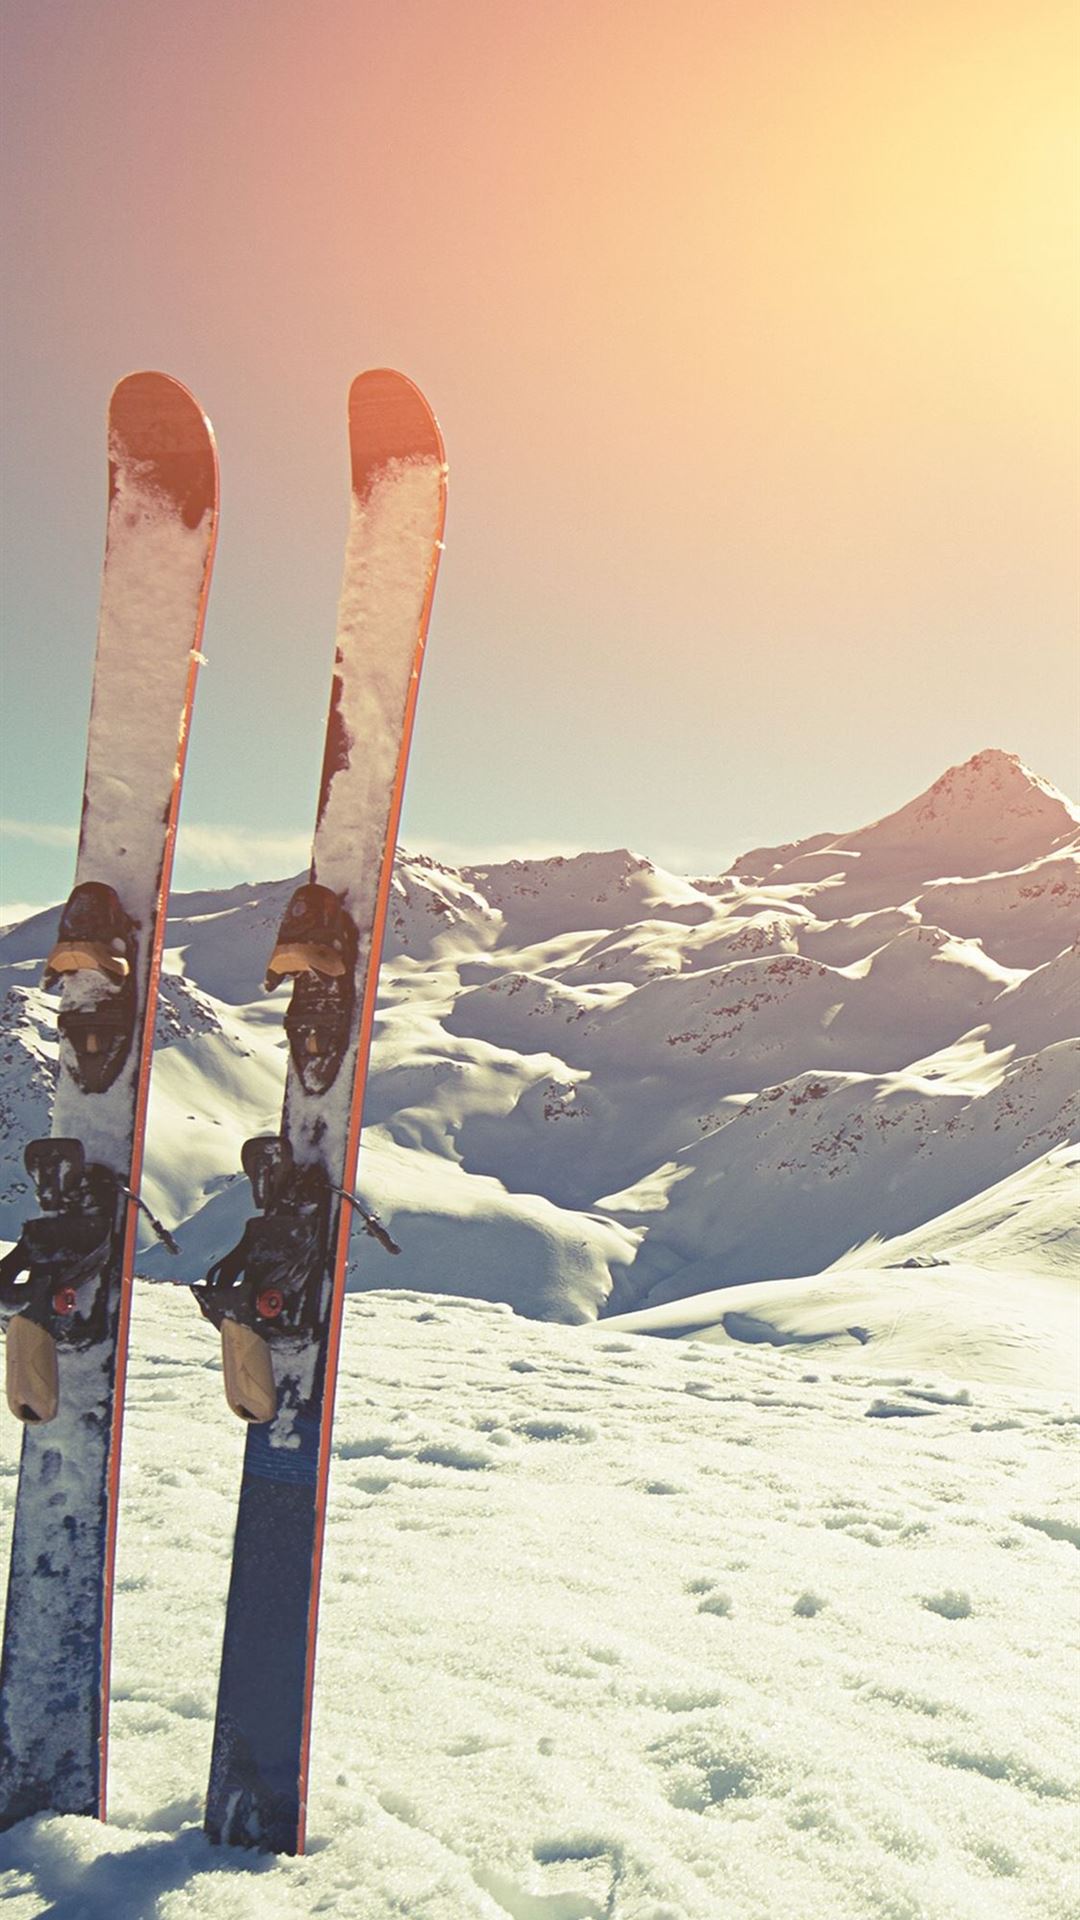 Skiing iphone wallpapers free download